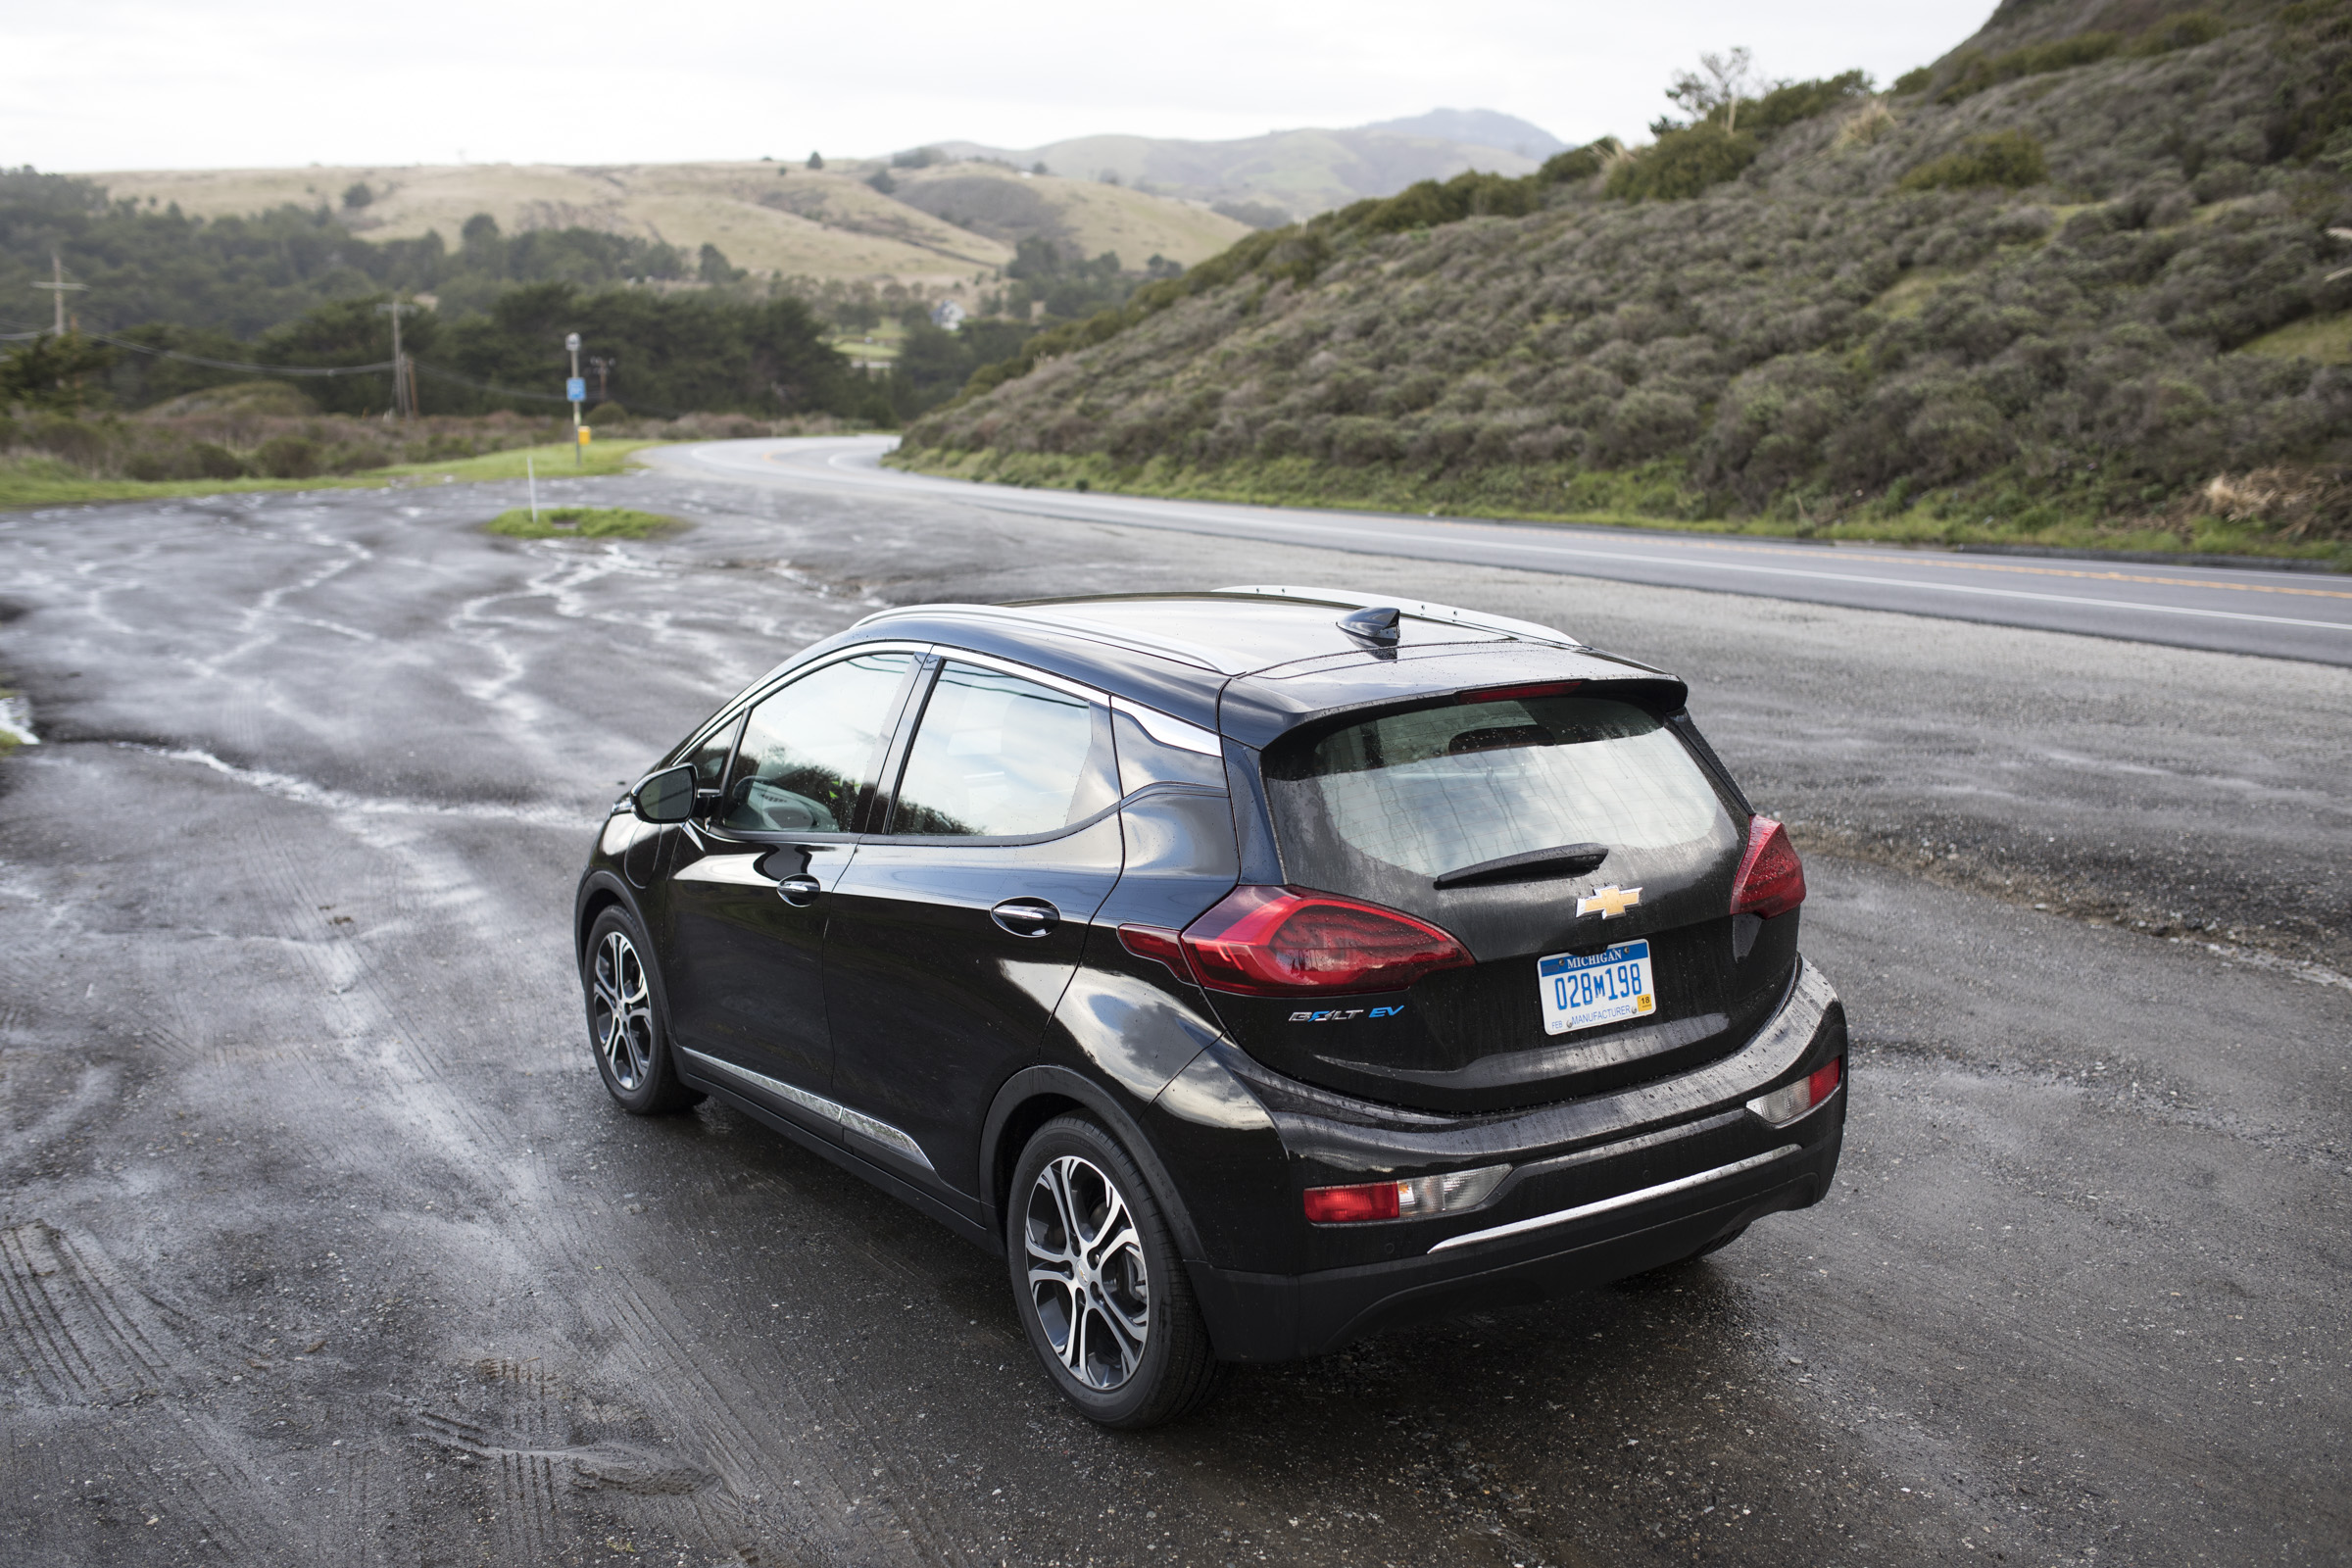 Here's how Chevrolet built a practical electric vehicle with the 2017 Bolt  EV | TechCrunch